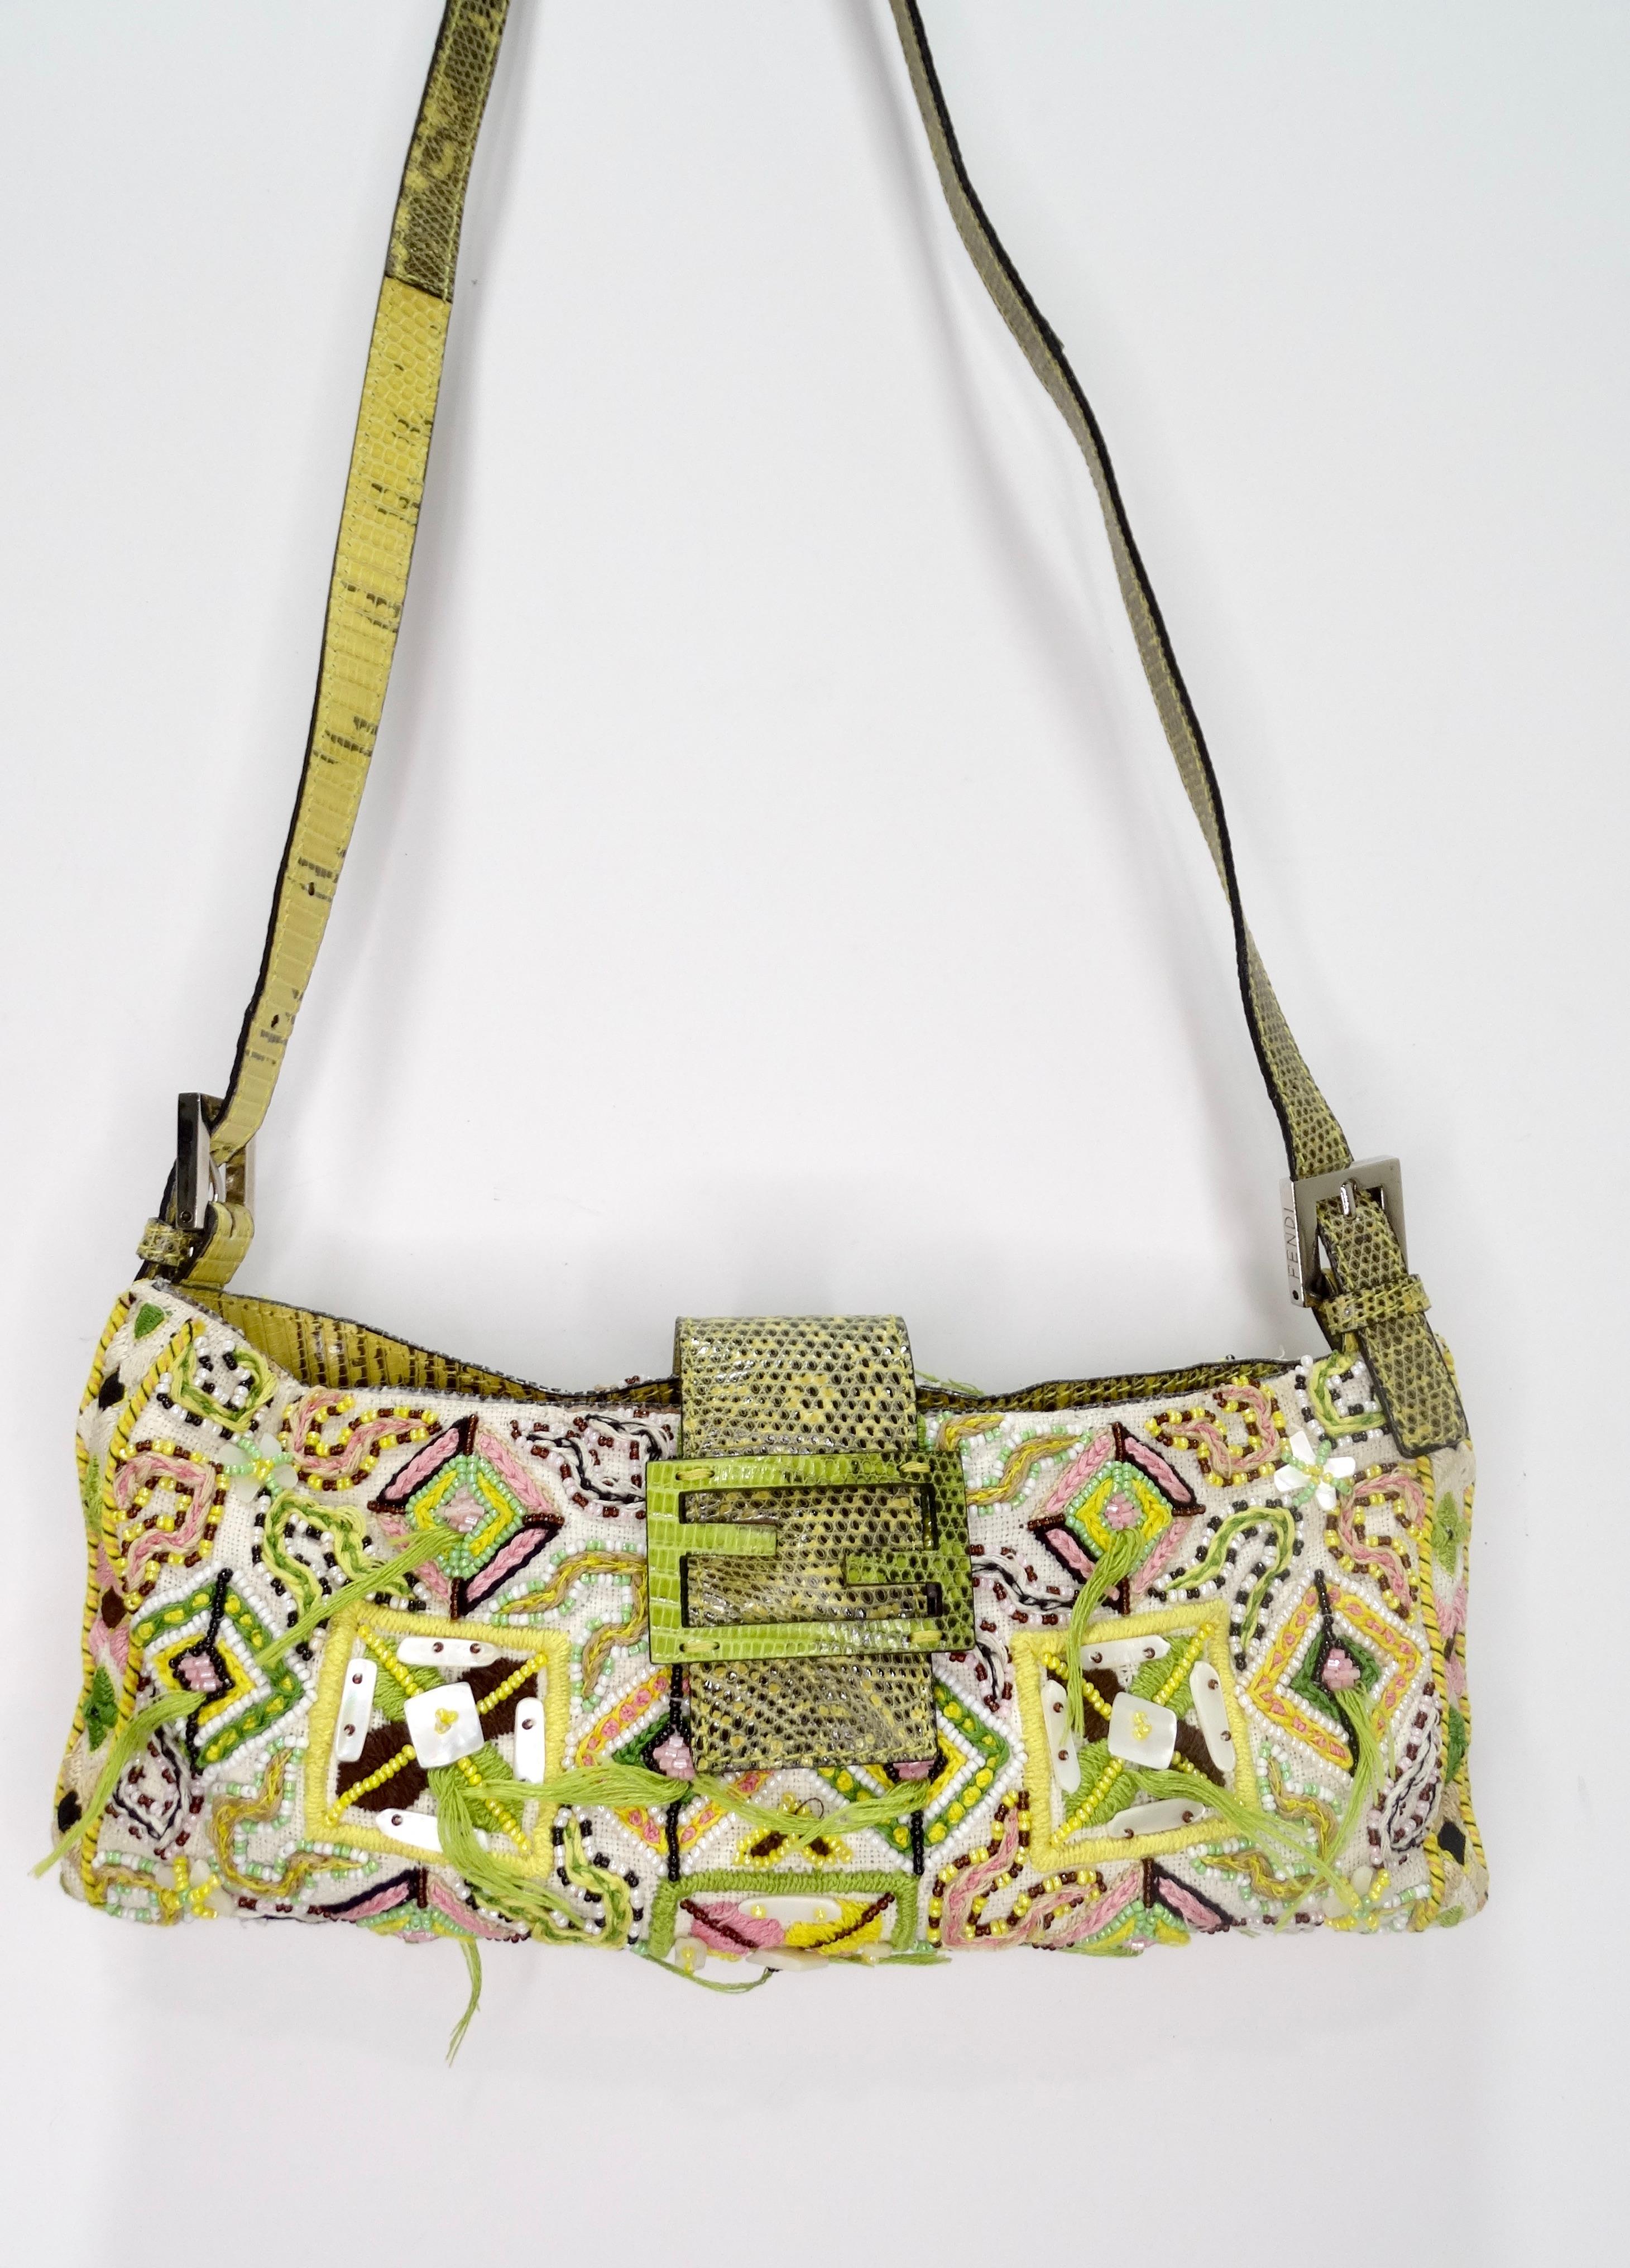 Make everyone green with envy with this adorable Fendi! Circa 1990s, this Fendi baguette features bohemian embroidery with colorful beading and Mother of Pearl flakes throughout. Includes a lime green/yellow python adjustable strap and the front